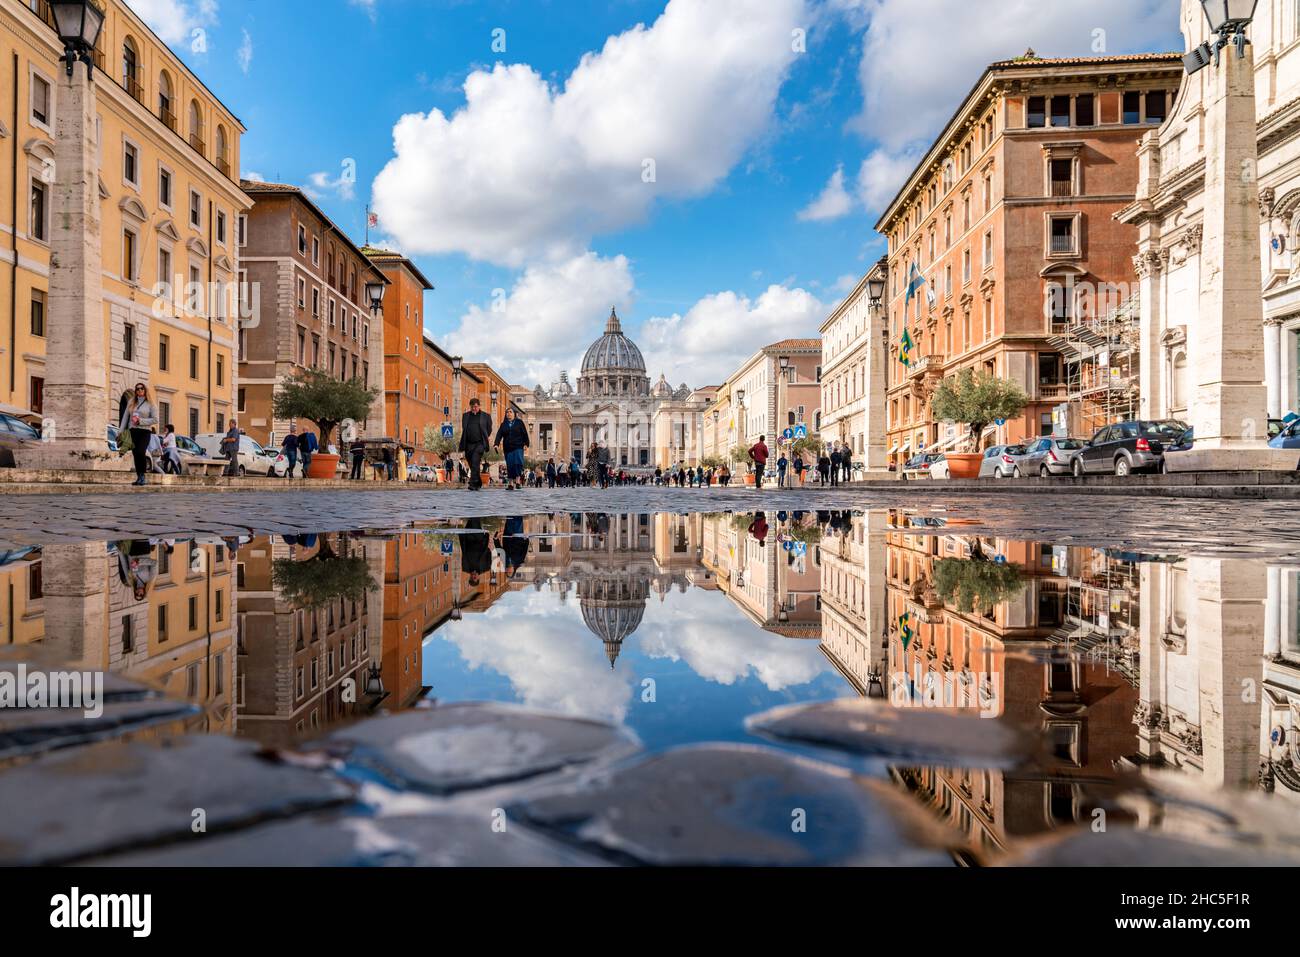 Rome, Italy - November 6, 2018: People walk along the street leading to piazza San Pietro, to the Vatican. The blue sky is reflected in the water Stock Photo